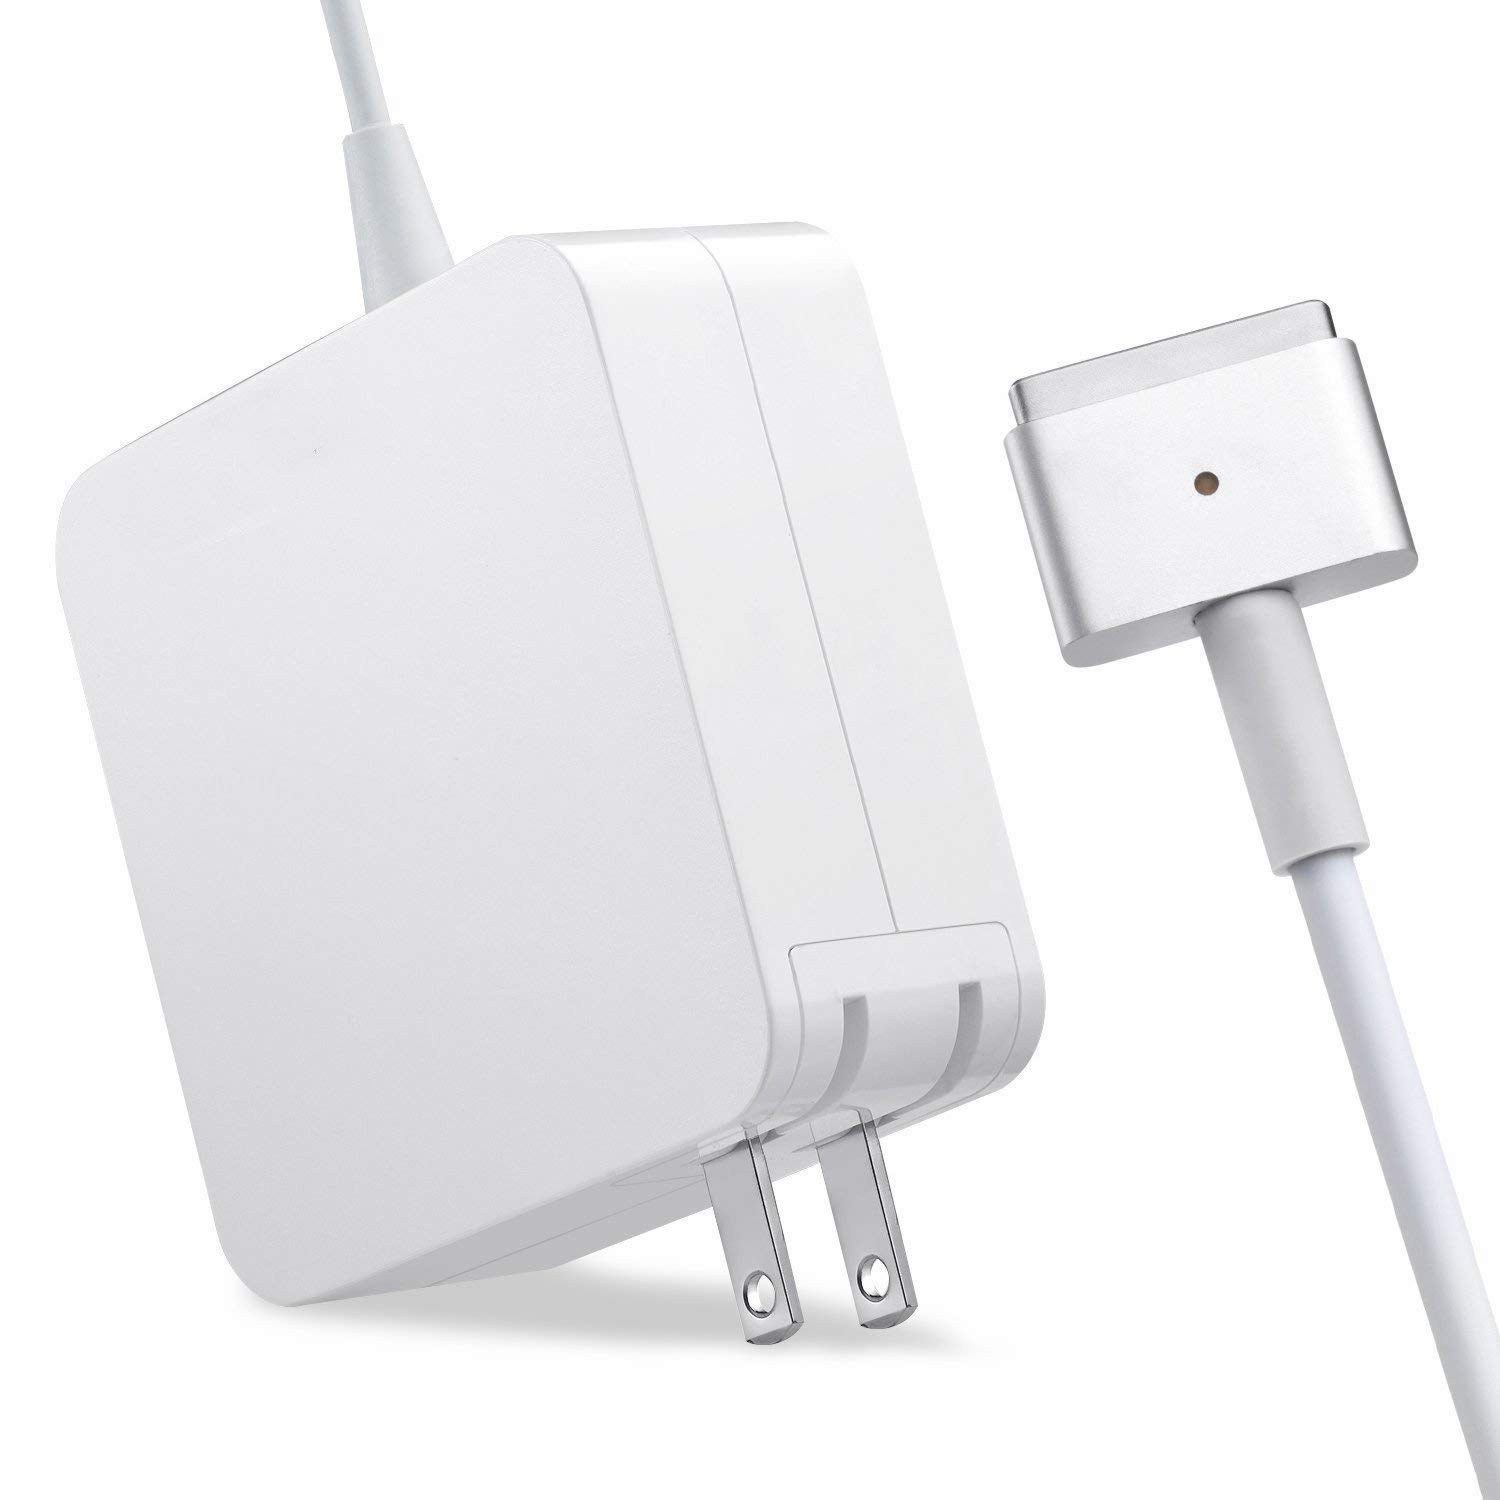 Mac Book Pro Charger AC 85W Magsafe 2 Power Adapter for MacBook Pro 17/15/13 inch Made After Mid 2012 